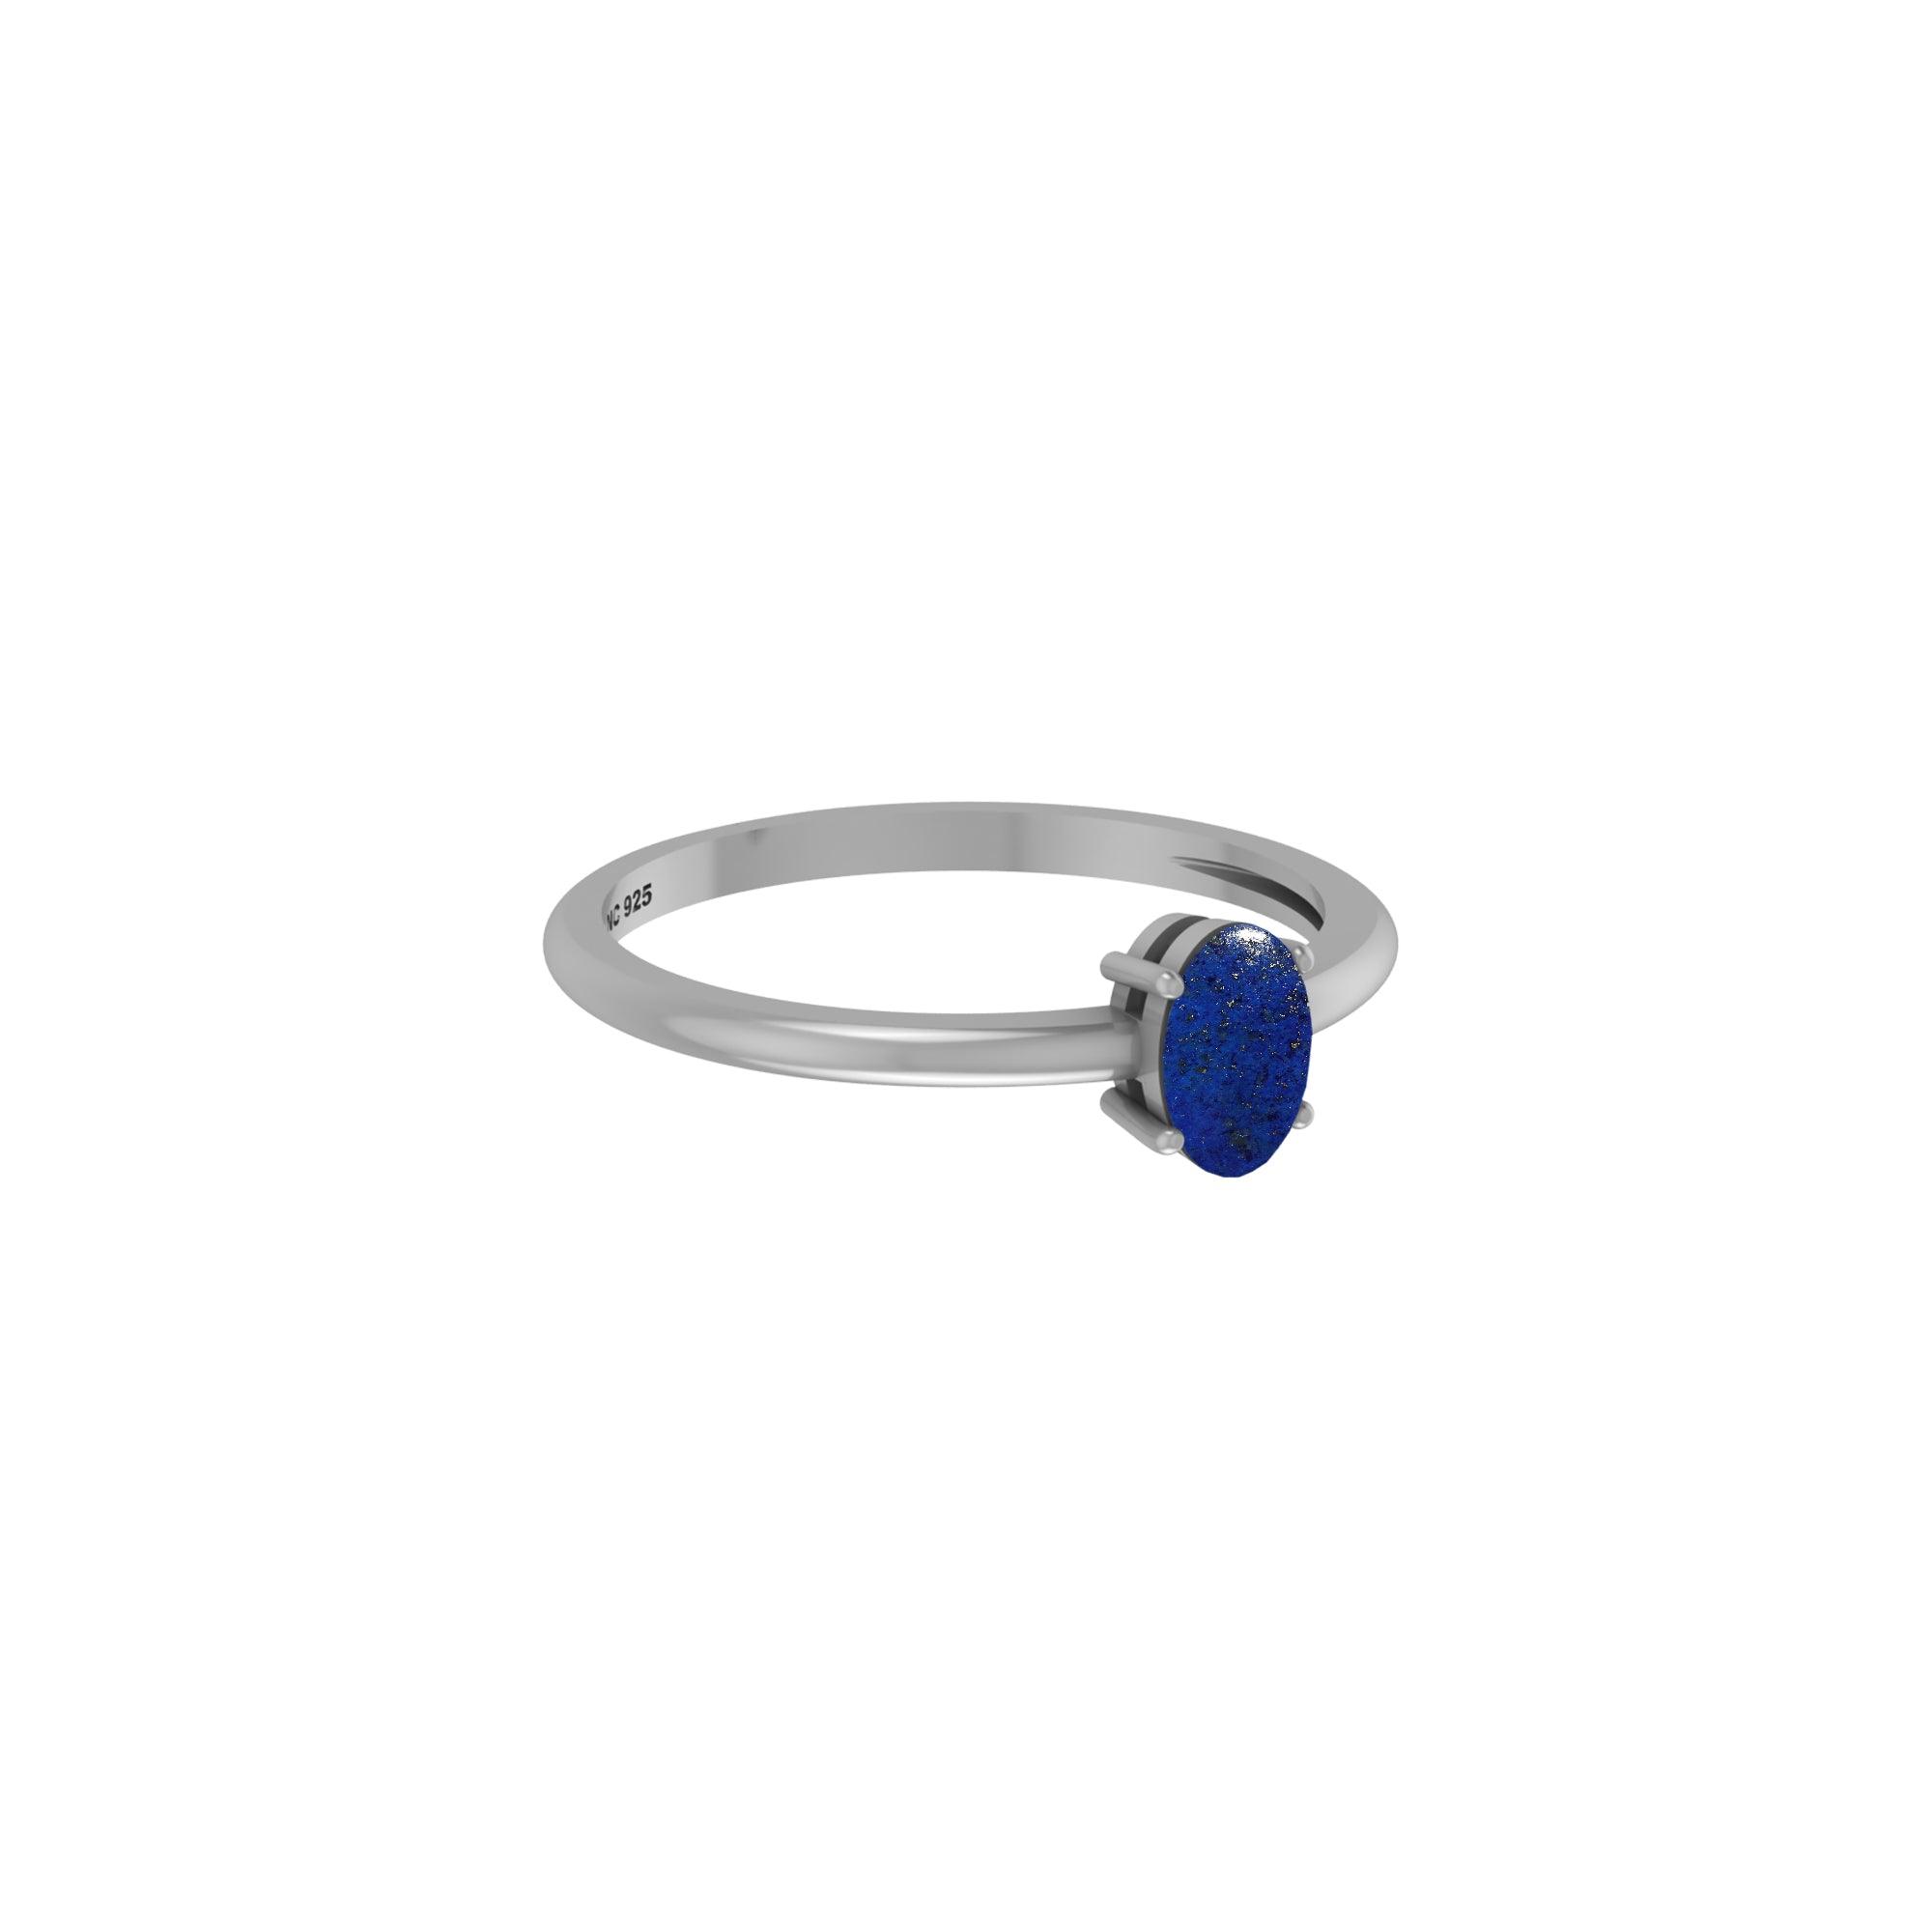 925 Sterling Silver Natural Lapis Lazuli Stackable Ring Prong Set Jewelry Pack of 12